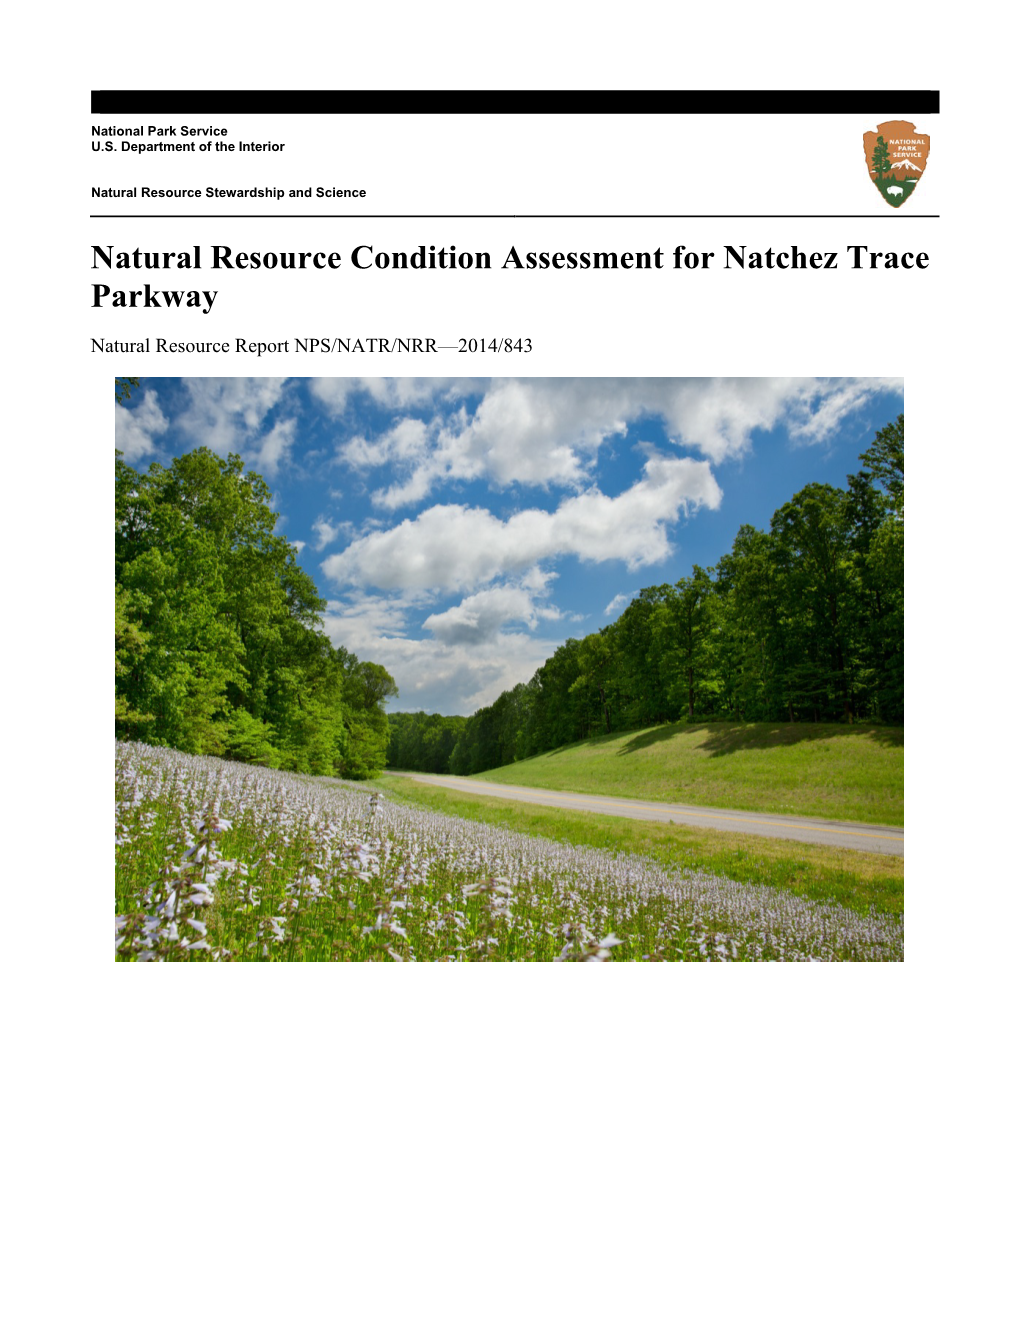 Natural Resource Condition Assessment for Natchez Trace Parkway Natural Resource Report NPS/NATR/NRR—2014/843